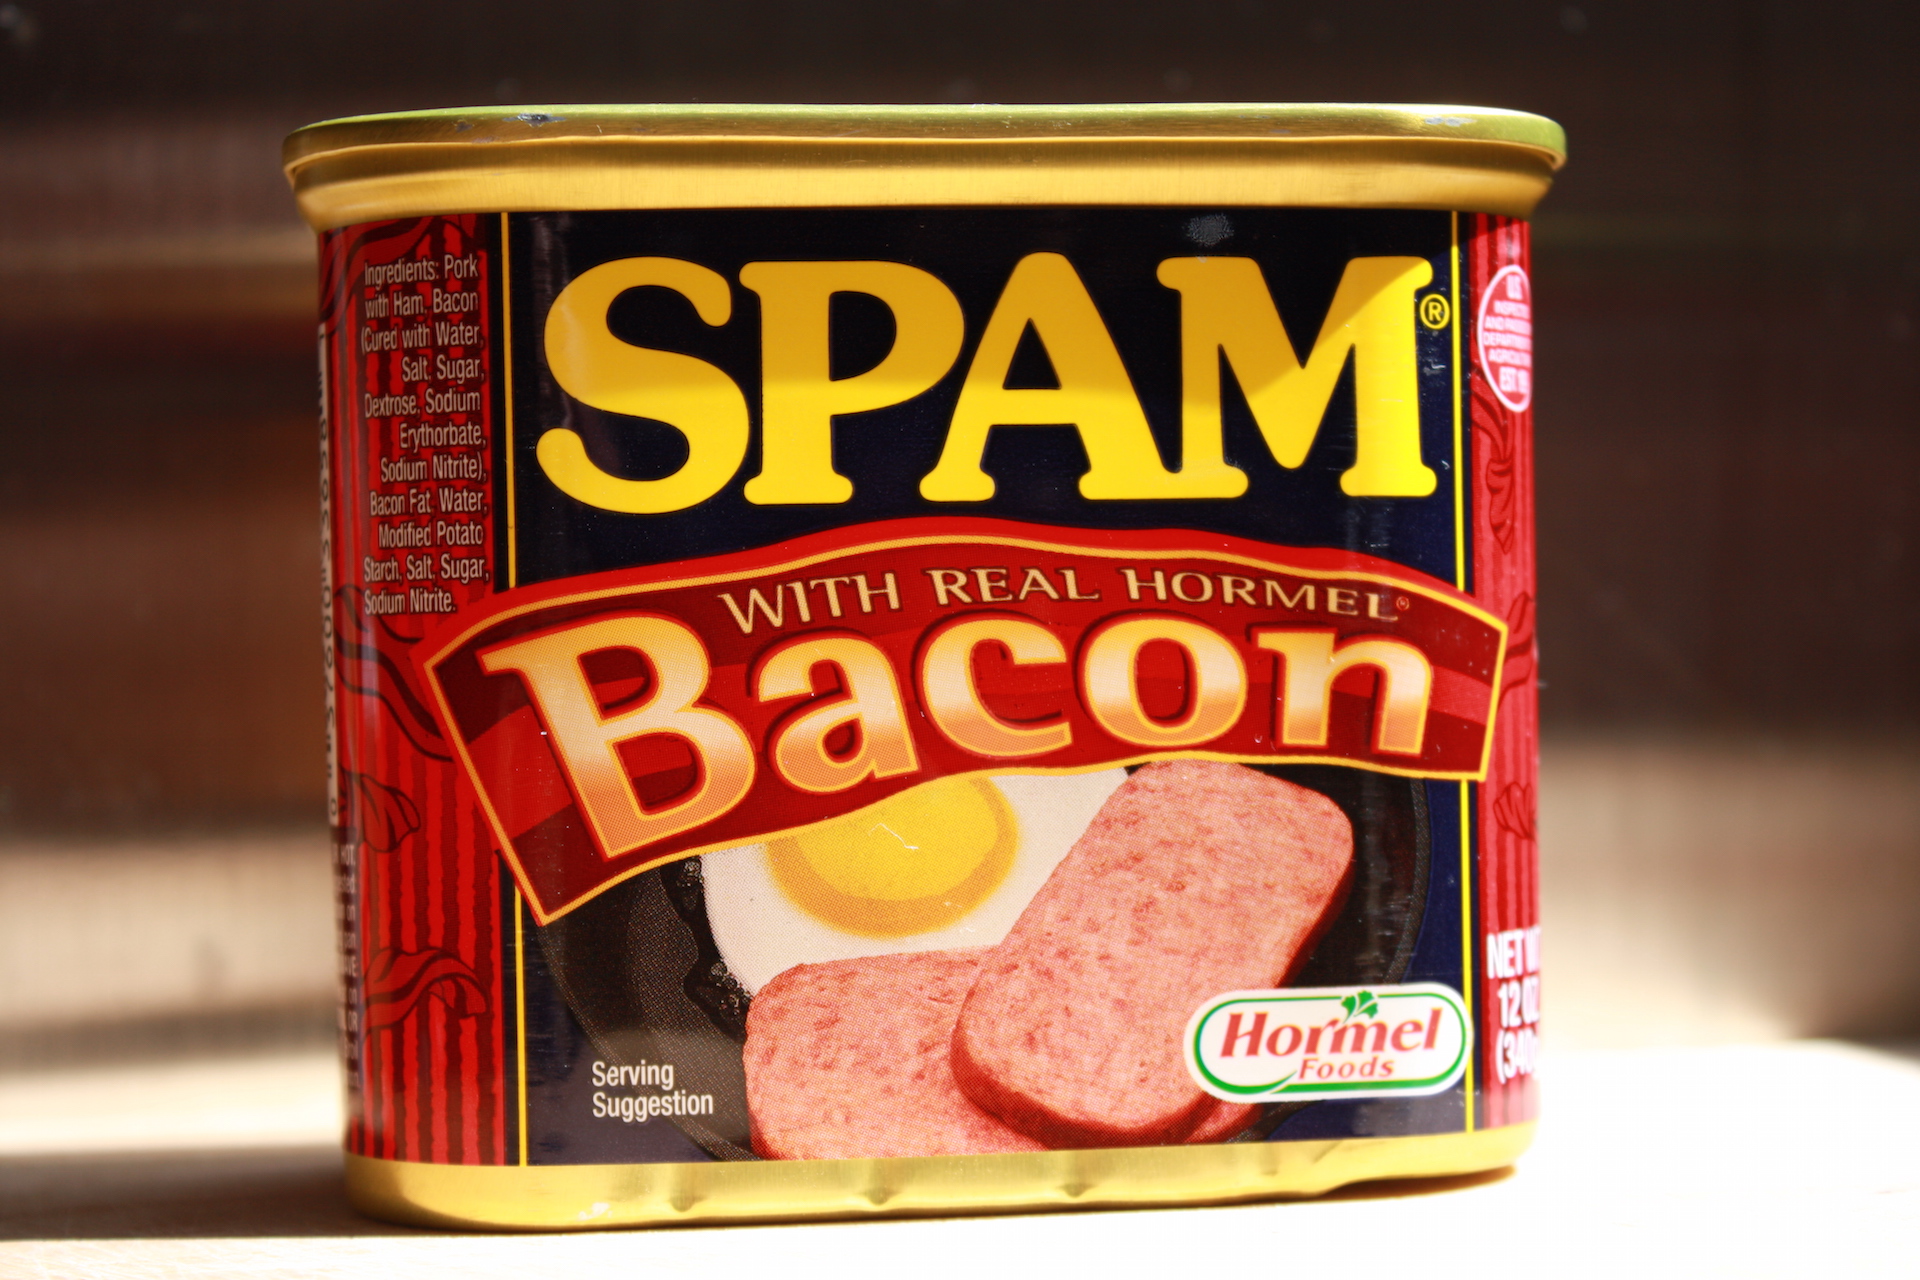 Ten Of The Most Disgusting Canned Food Products Weird 6103